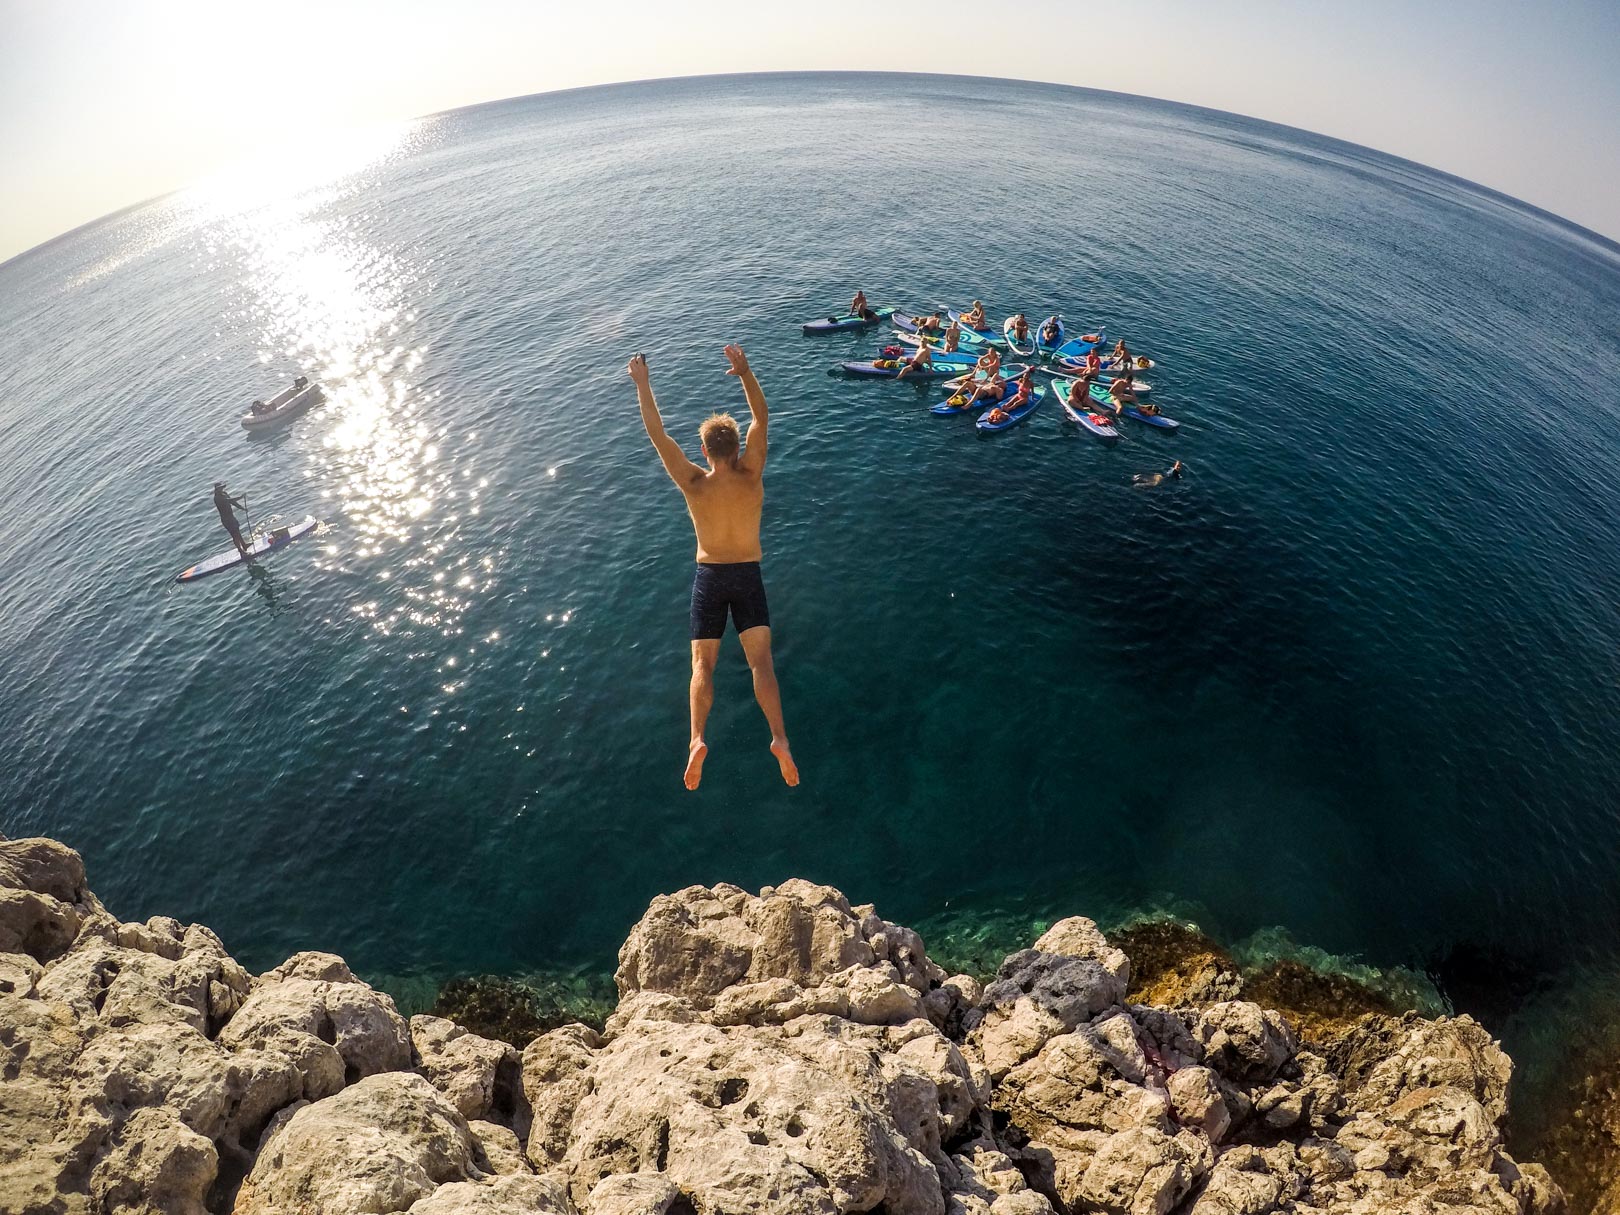 Do you dare to do cliff-jumping?